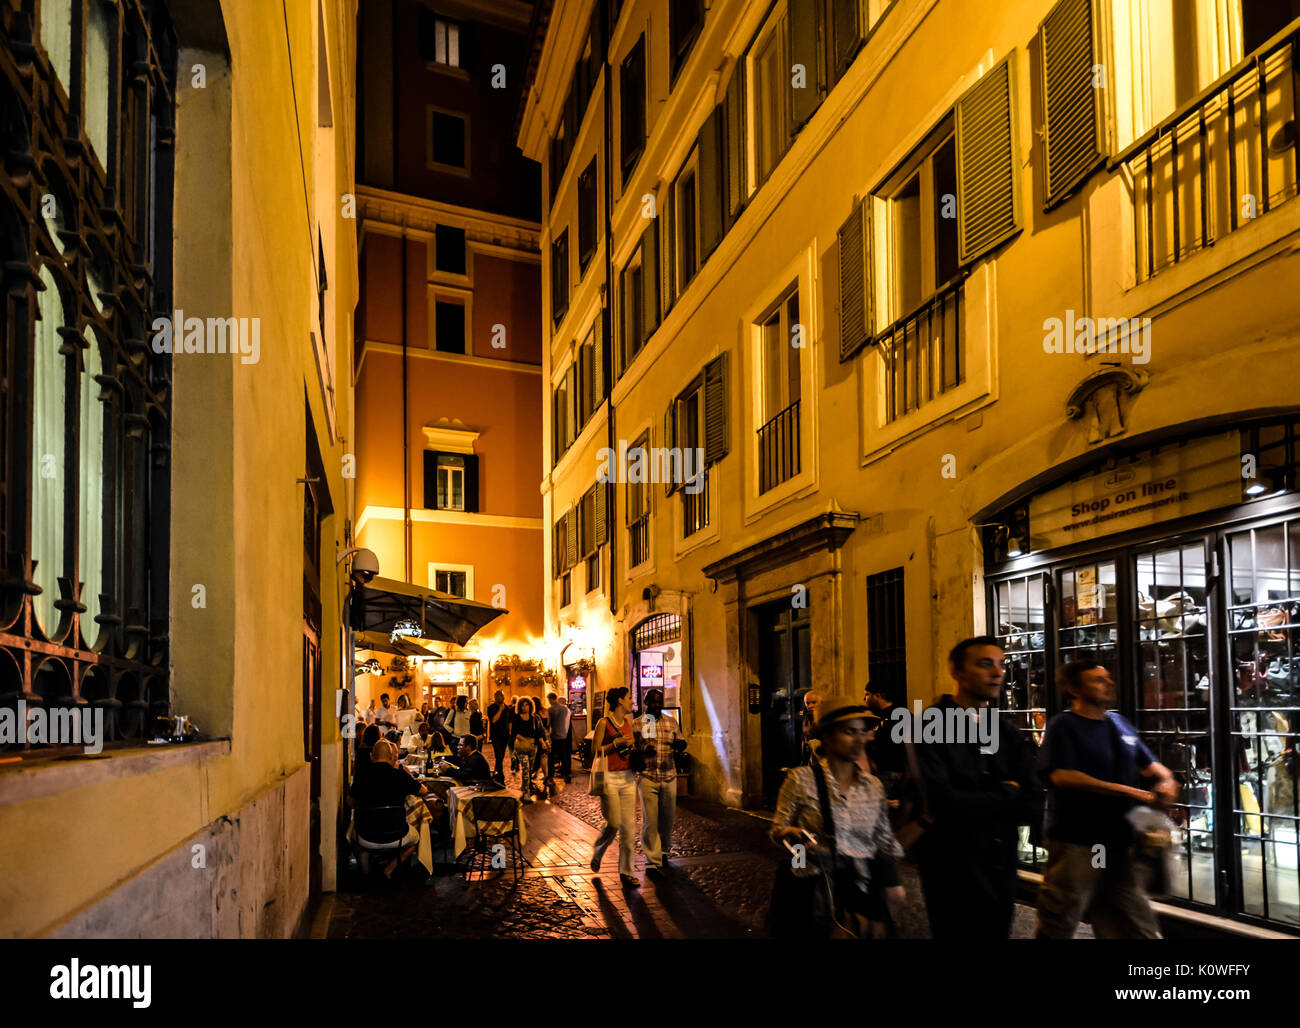 A evening stroll in Rome Italy through a narrow back street with an outdoor cafe and tourists enjoying themselves Stock Photo